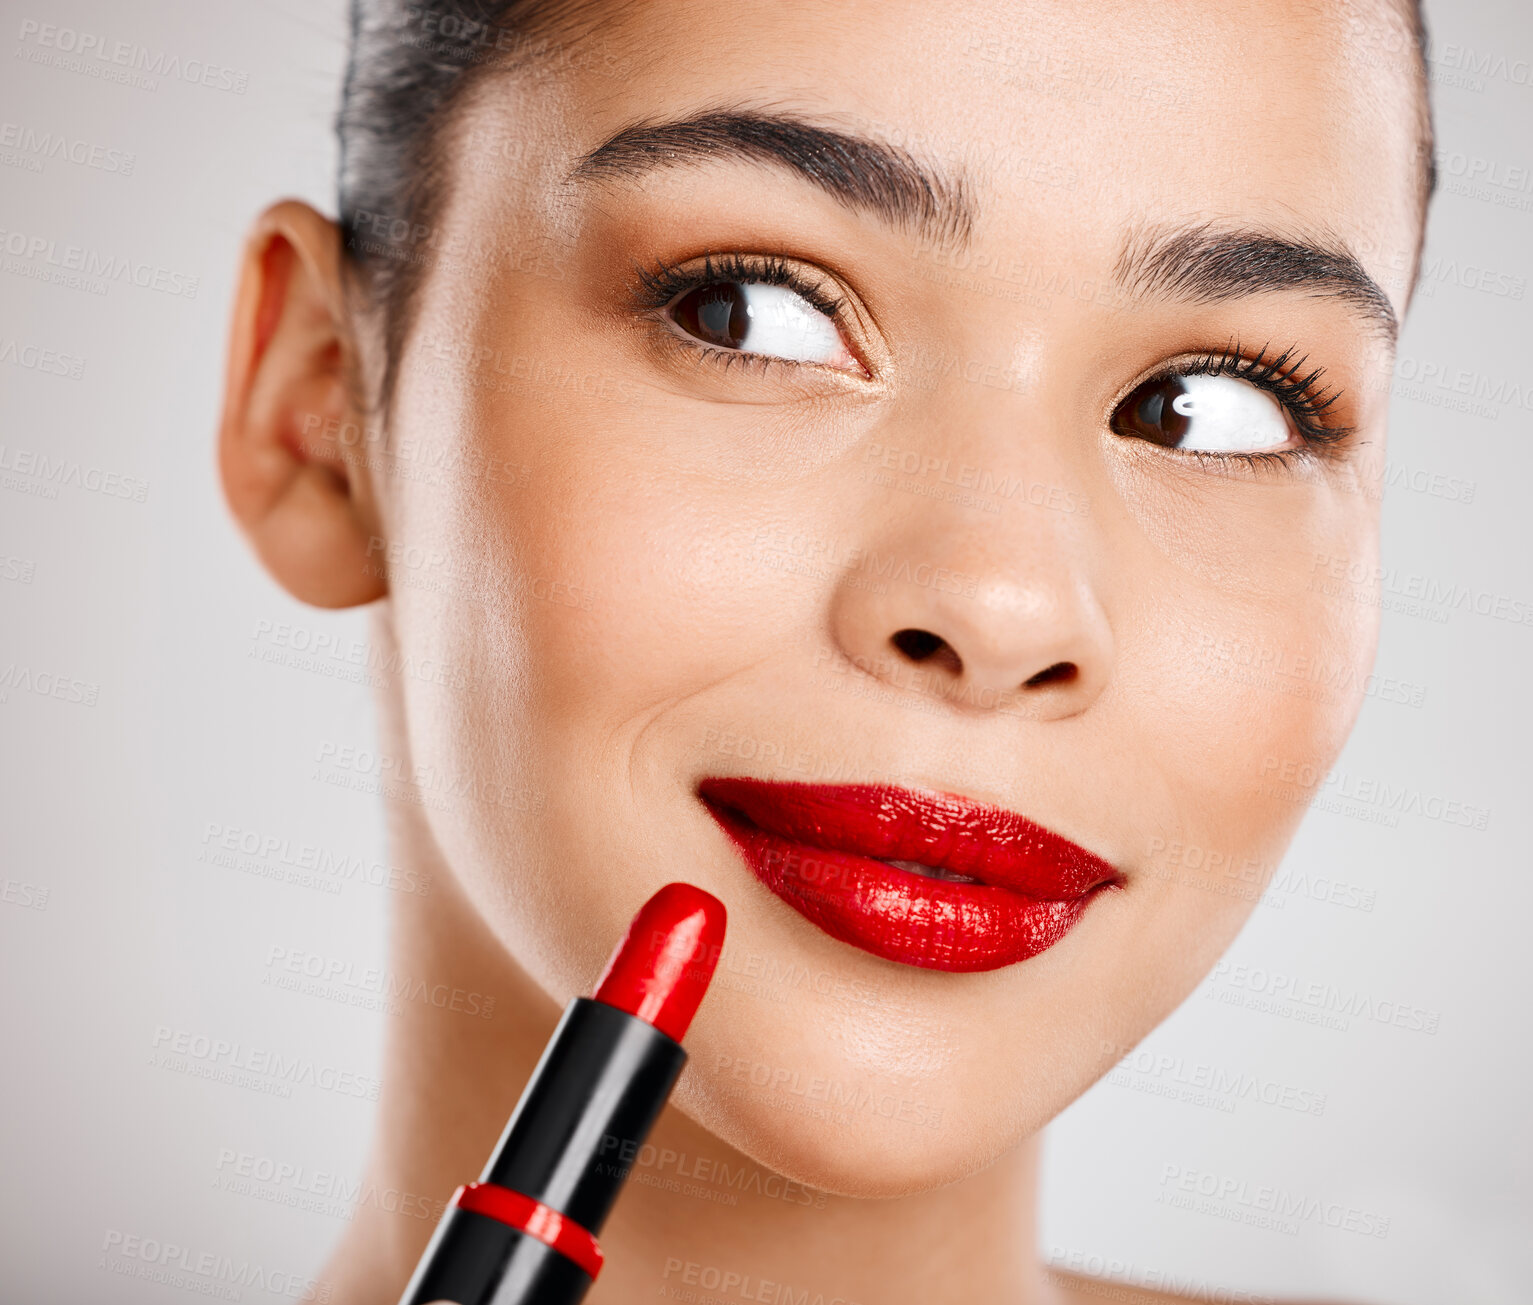 Buy stock photo Studio shot of an attractive young woman applying red lipstick against a grey background